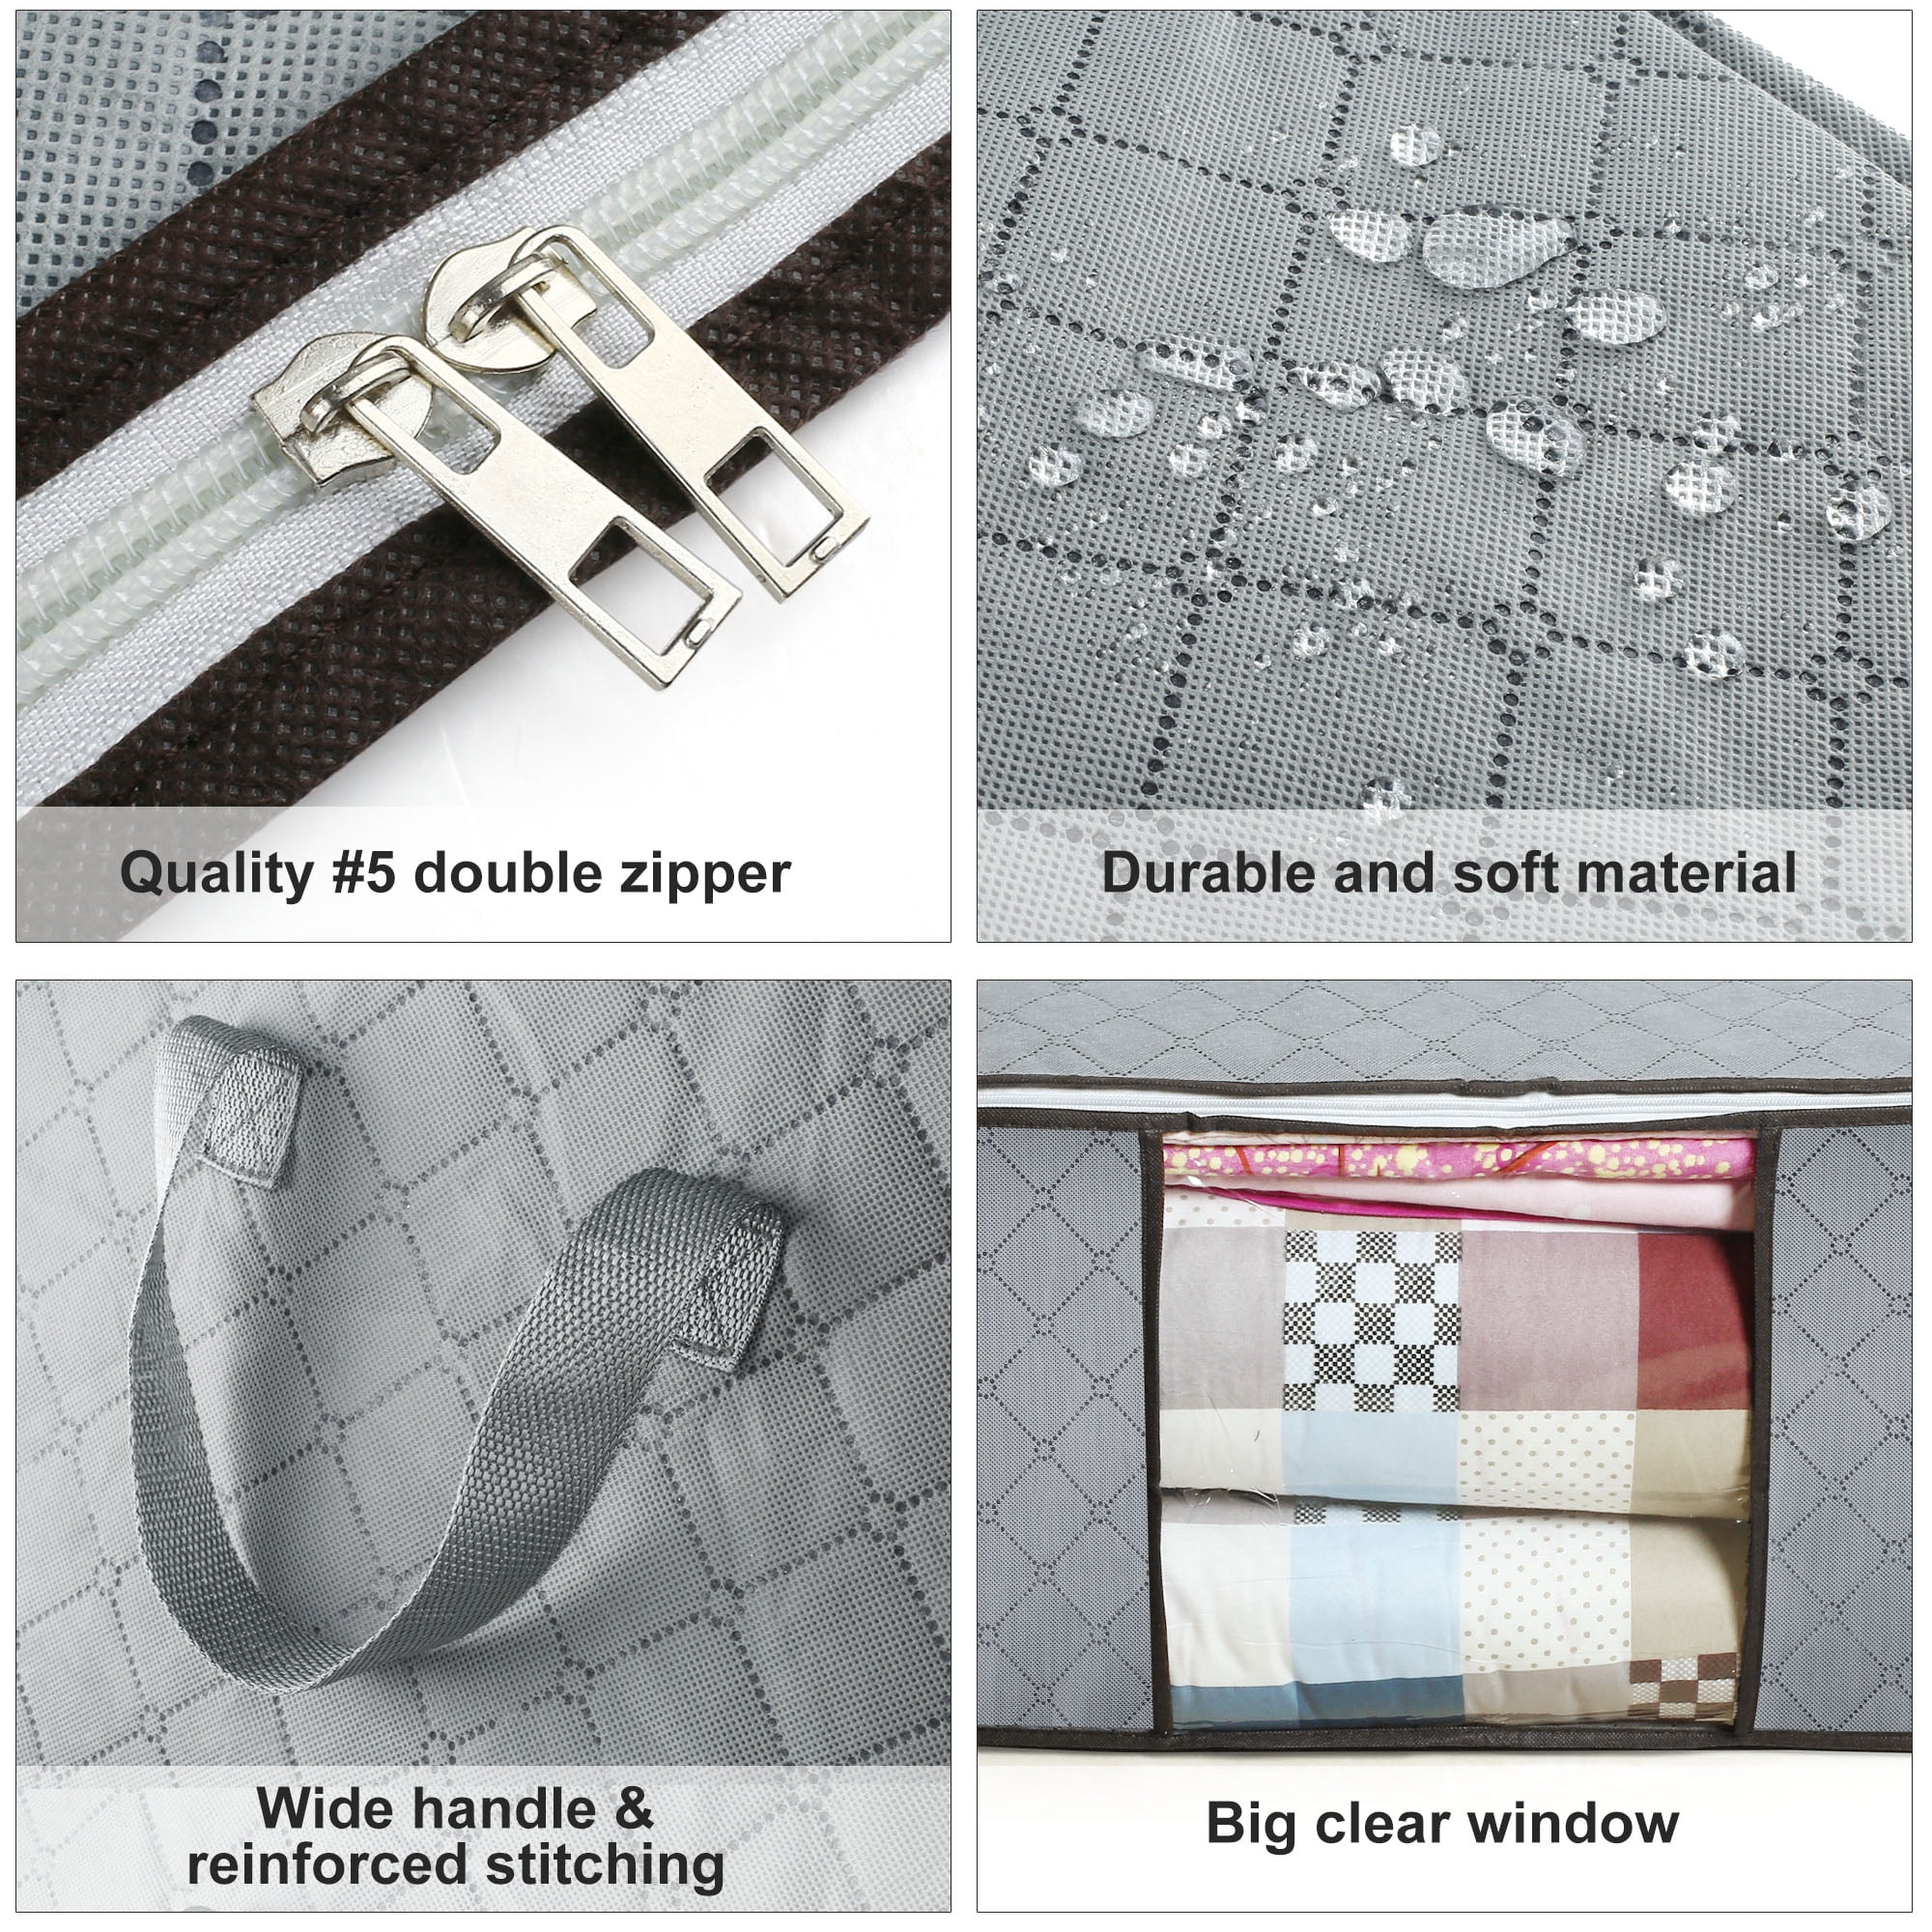 Pack of 3 Foldable Clothes Storage Zipper Bag - Bazaarzo